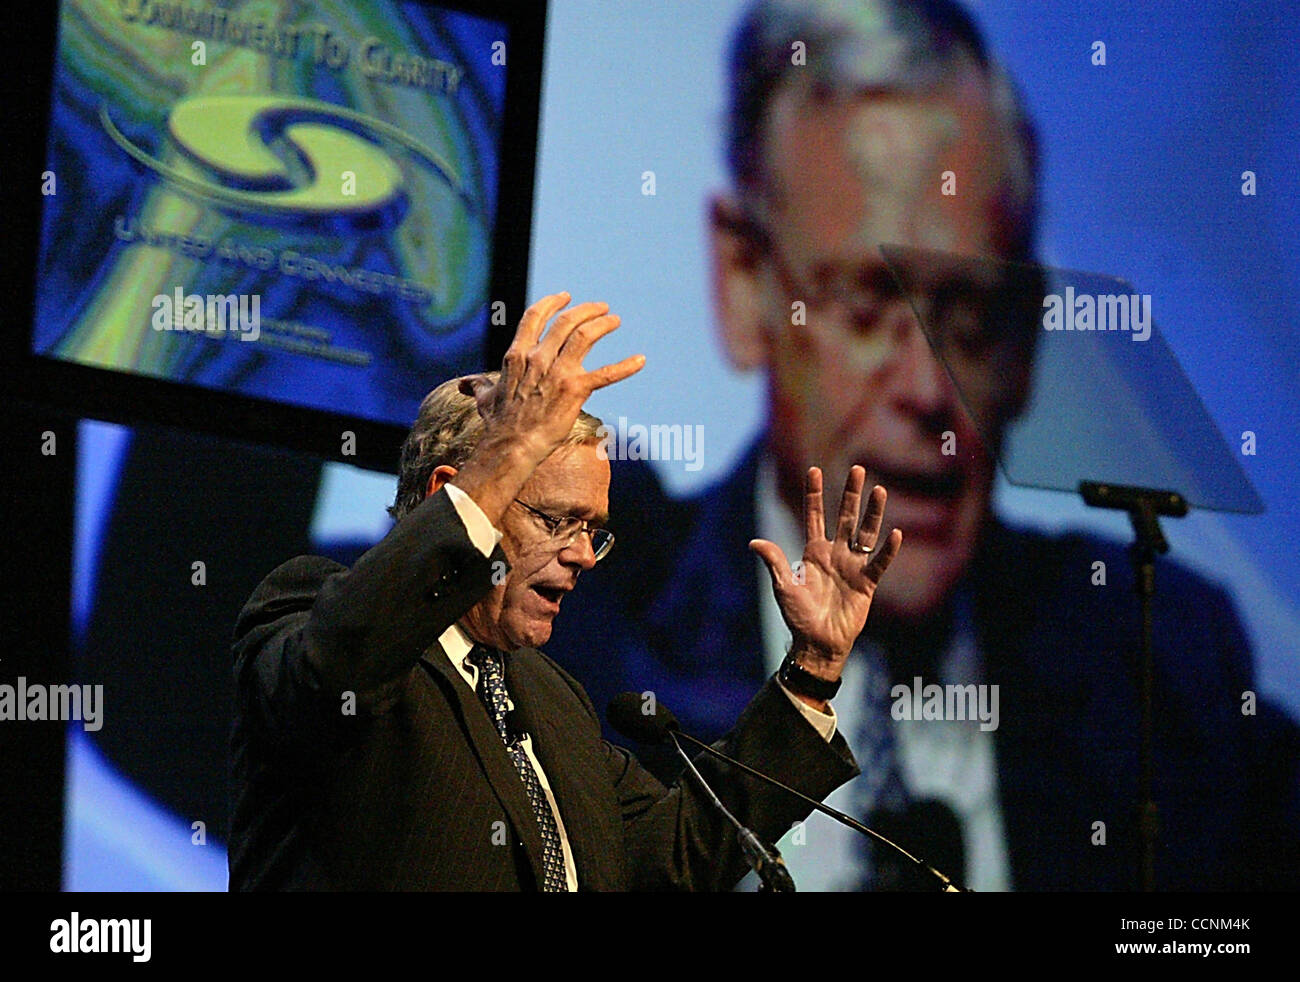 Nov 05, 2004; Boca Raton , FL, USA; Securities and Exchange Commission Chairman WILLIAM DONALDSON addresses the Securities Industry Association's annual convention at the Boca Raton Resort & Club in Boca Raton Friday, Nov. 5, 2004. Donaldson stressed accountability and integrity in the industry duri Stock Photo